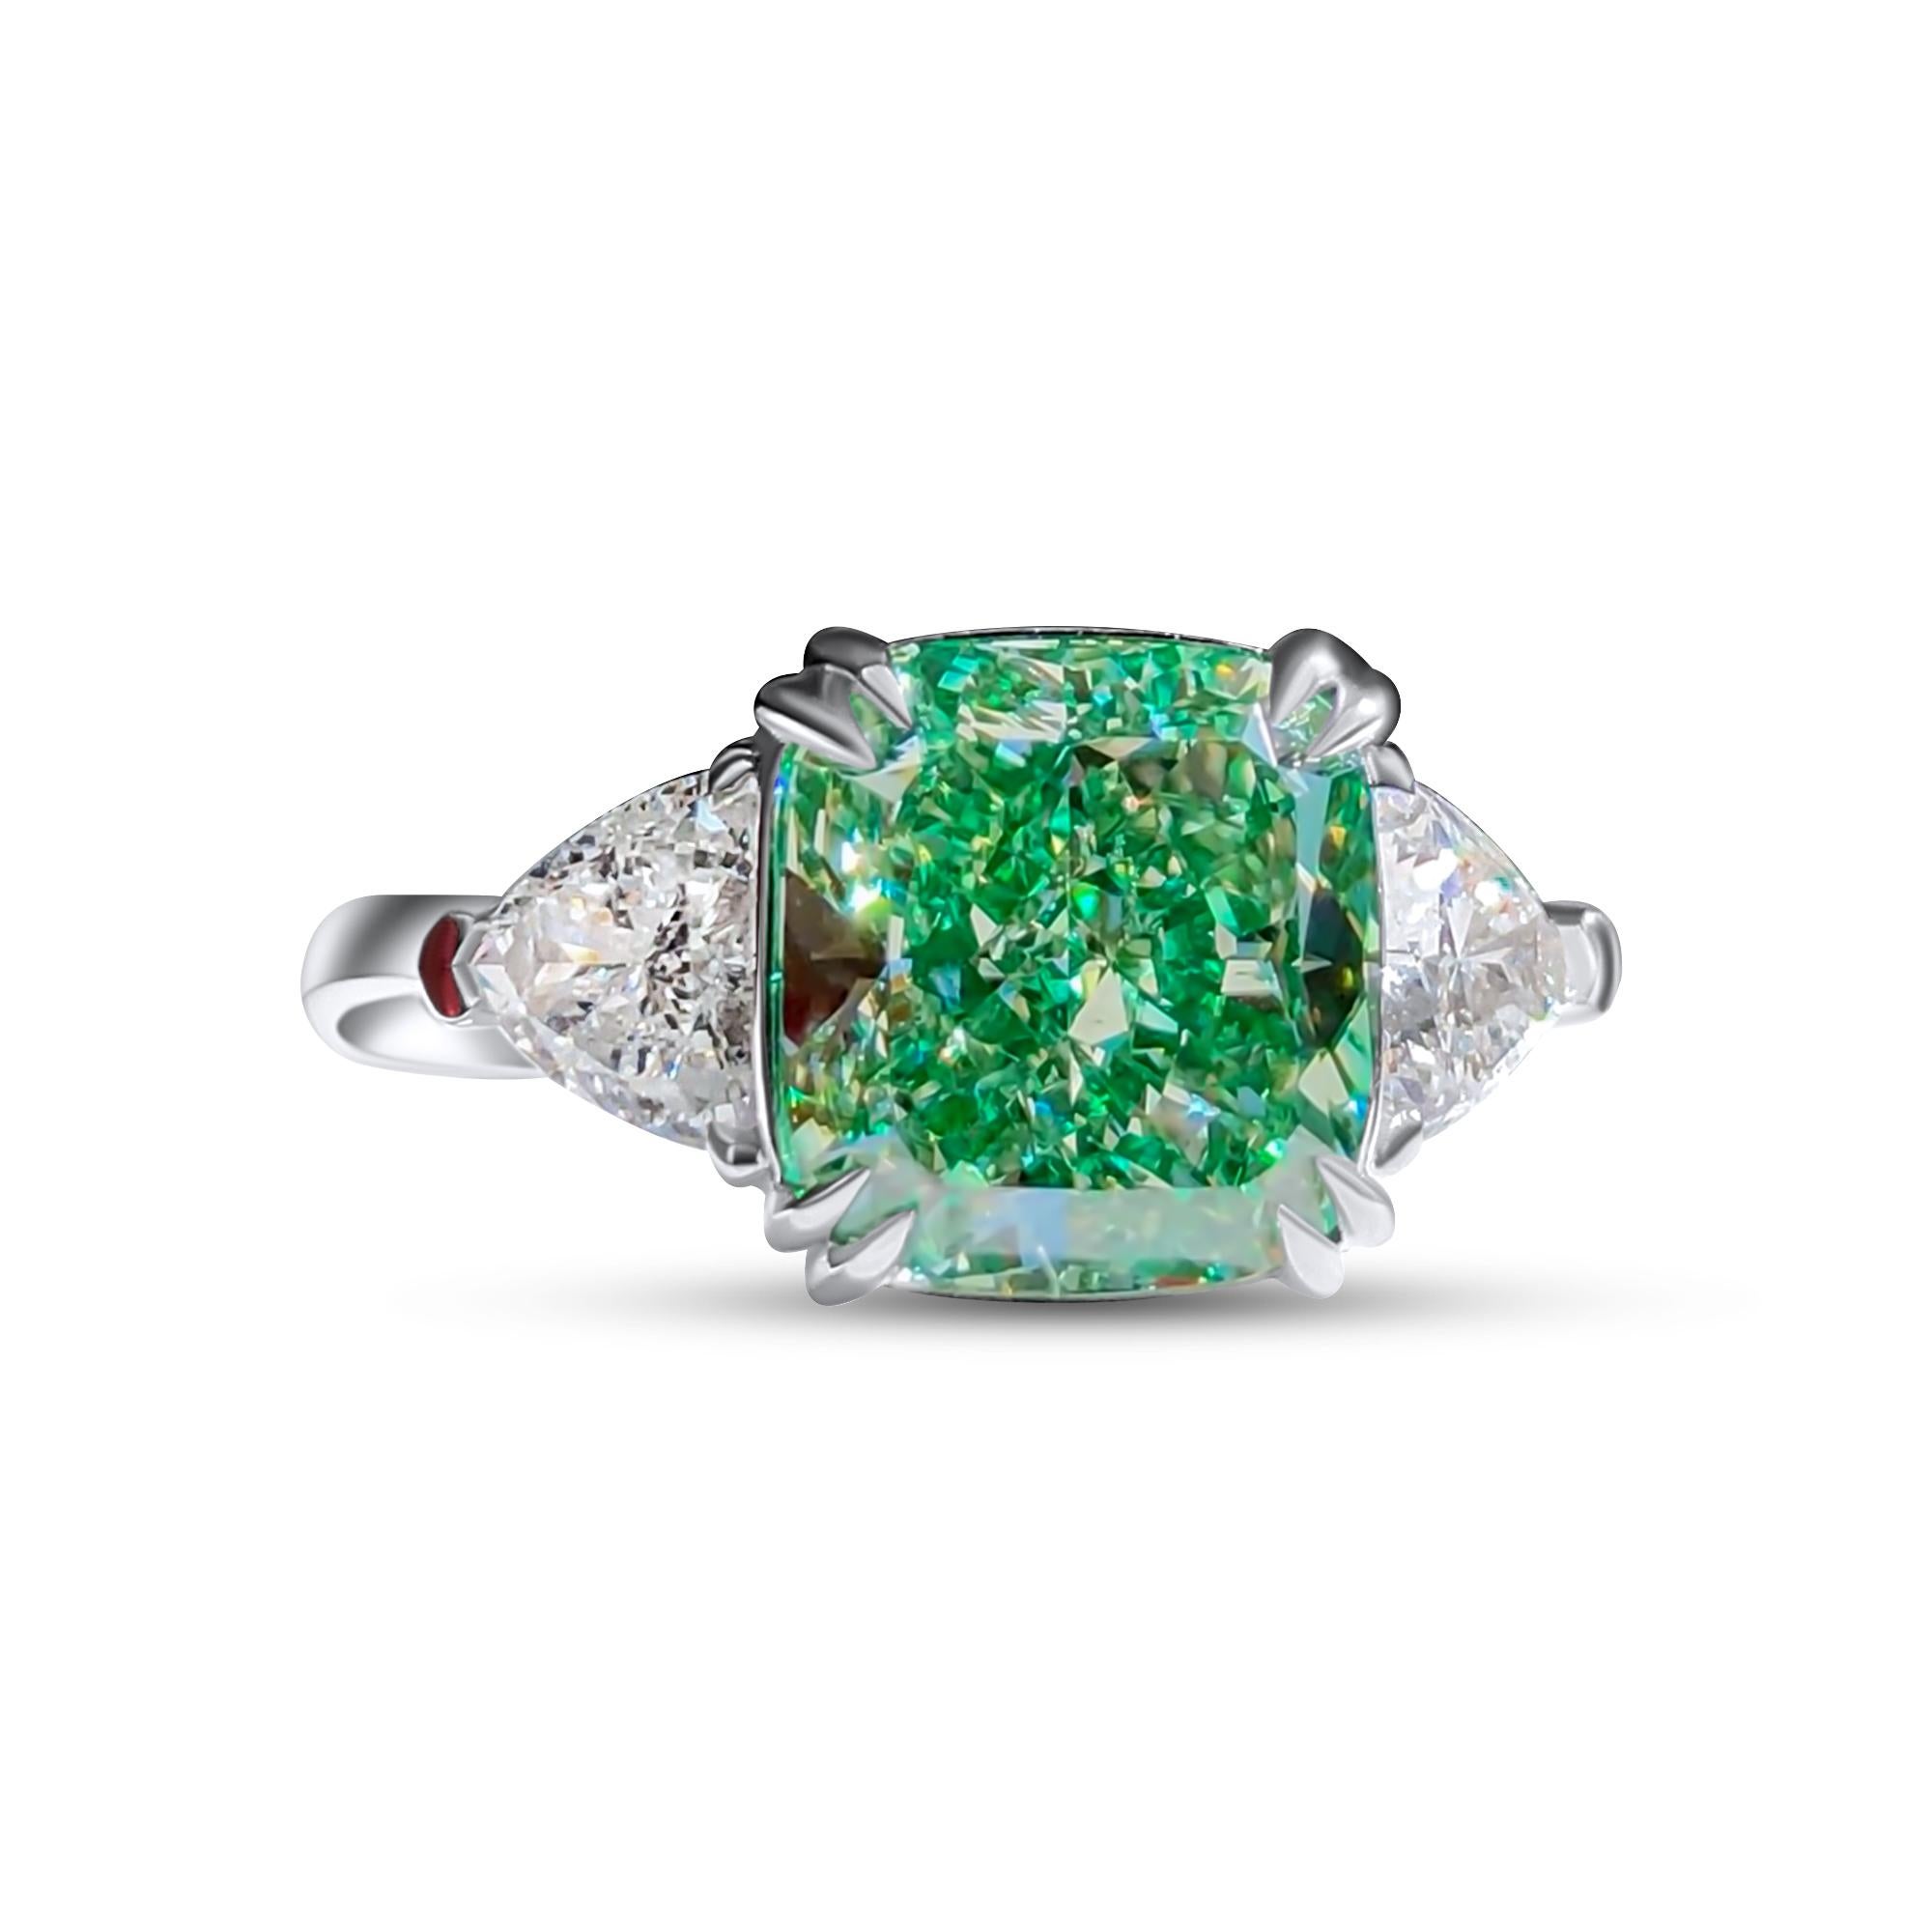 We invite you to discover this elegant ring set with a GIA certified cushion cut green diamond of 4,12 carats enhanced with 2 trillion cut colorless diamonds.
The wonderful green color of the main diamond makes this ring rare, unique and very